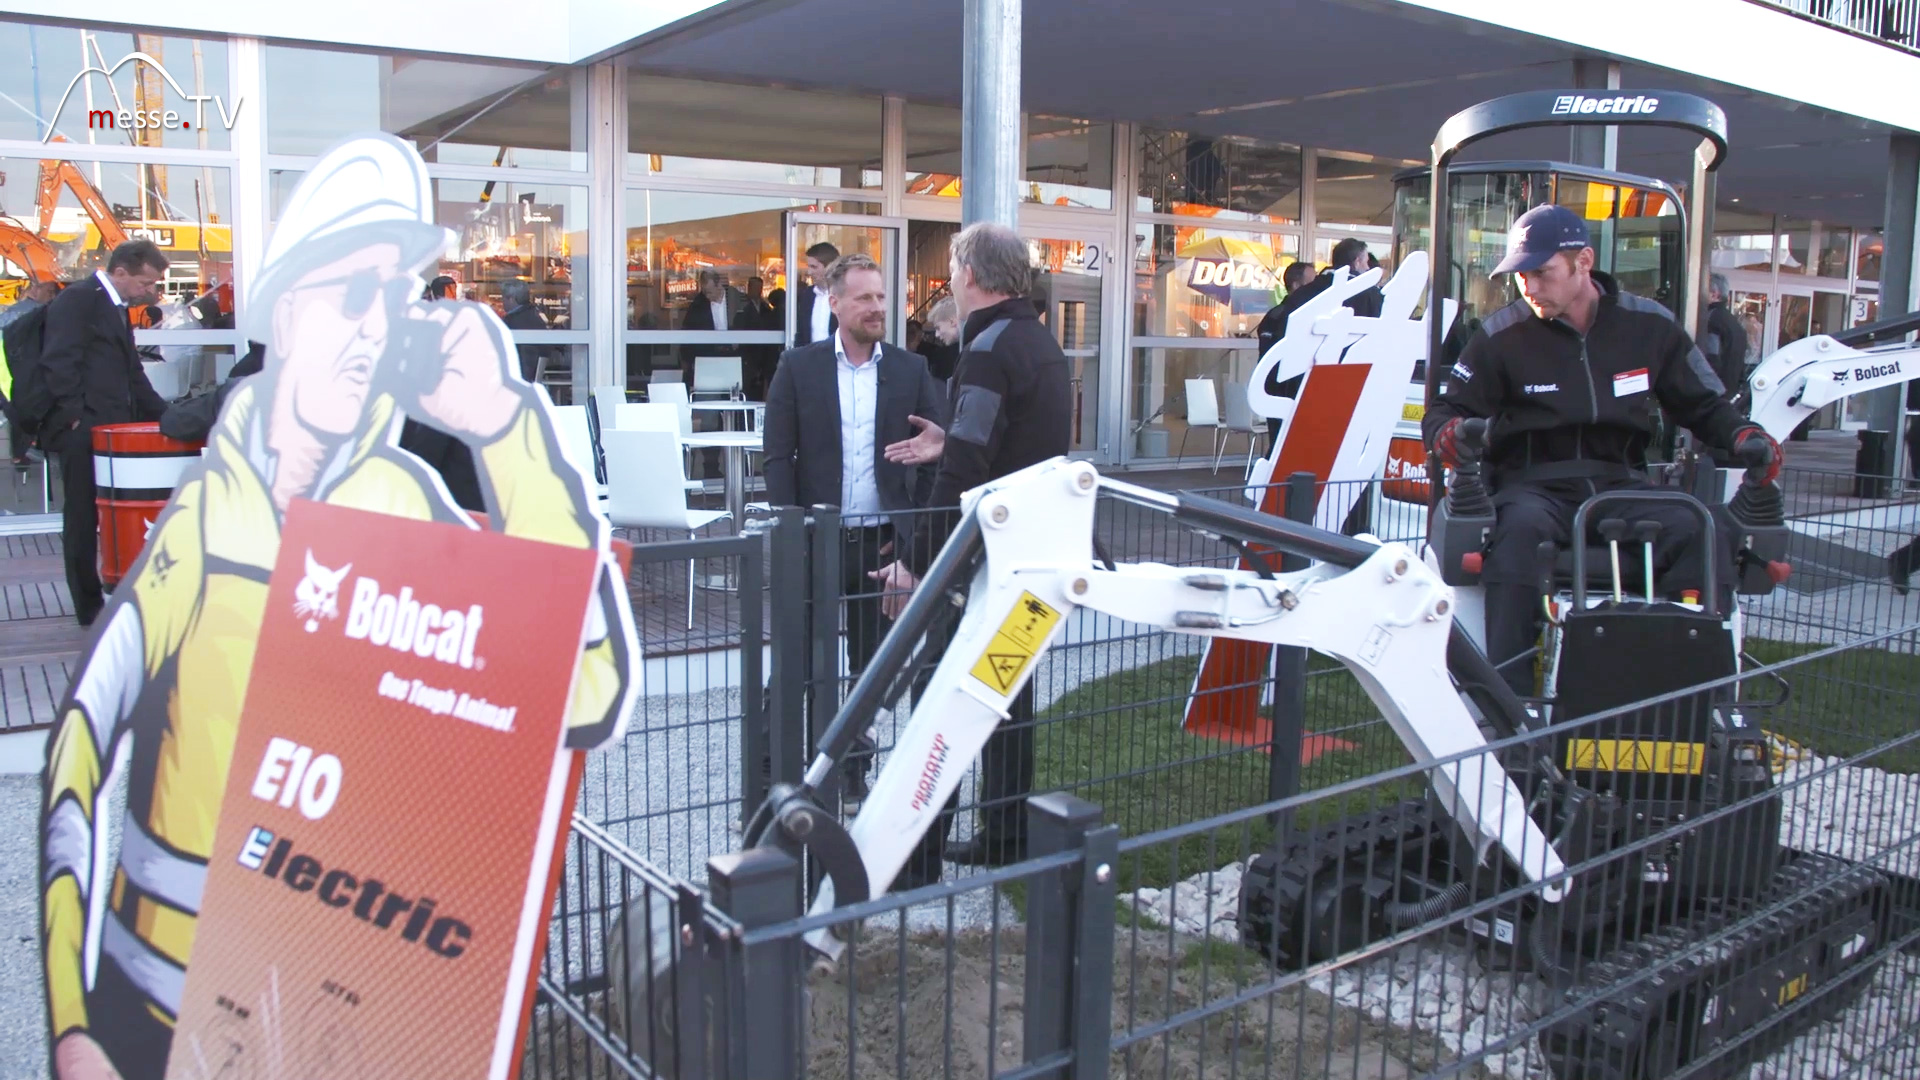 Bobcat compact excavator with electric drive bauma construction site electric vehicle trade fair munich